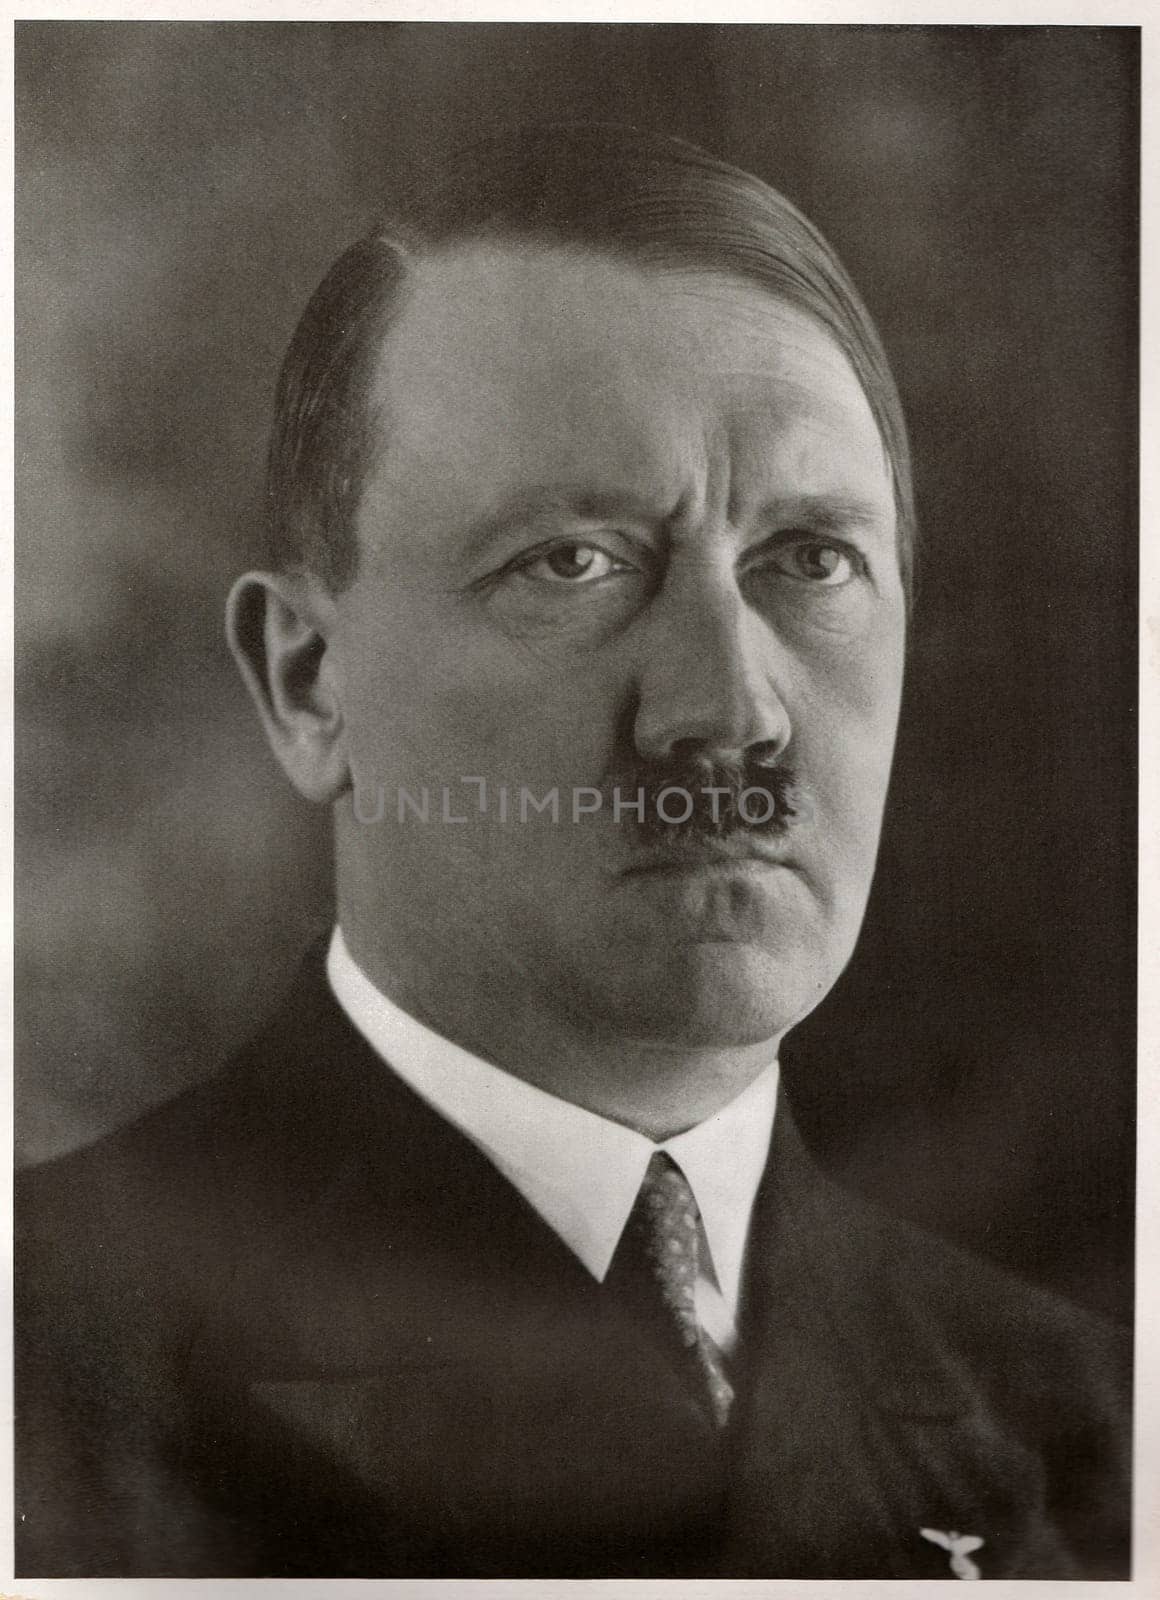 Studio portrait of Adolf Hitler, leader of nazi Germany. Reproduction of antique photo. by roman_nerud